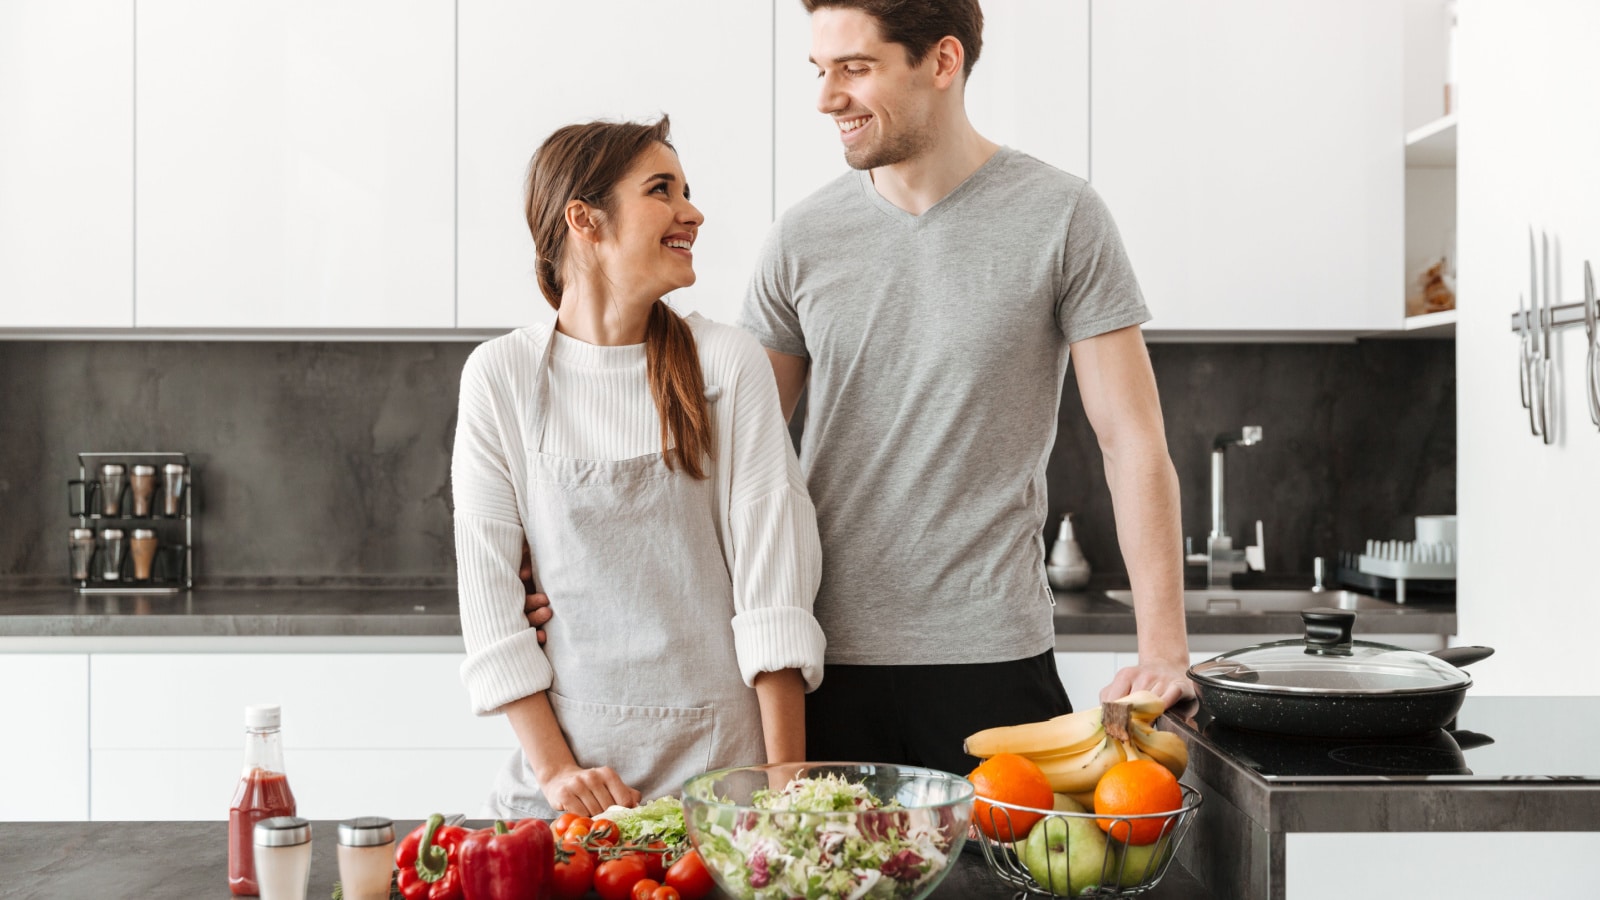 Portrait of a smiling young couple cooking together at the kitchen